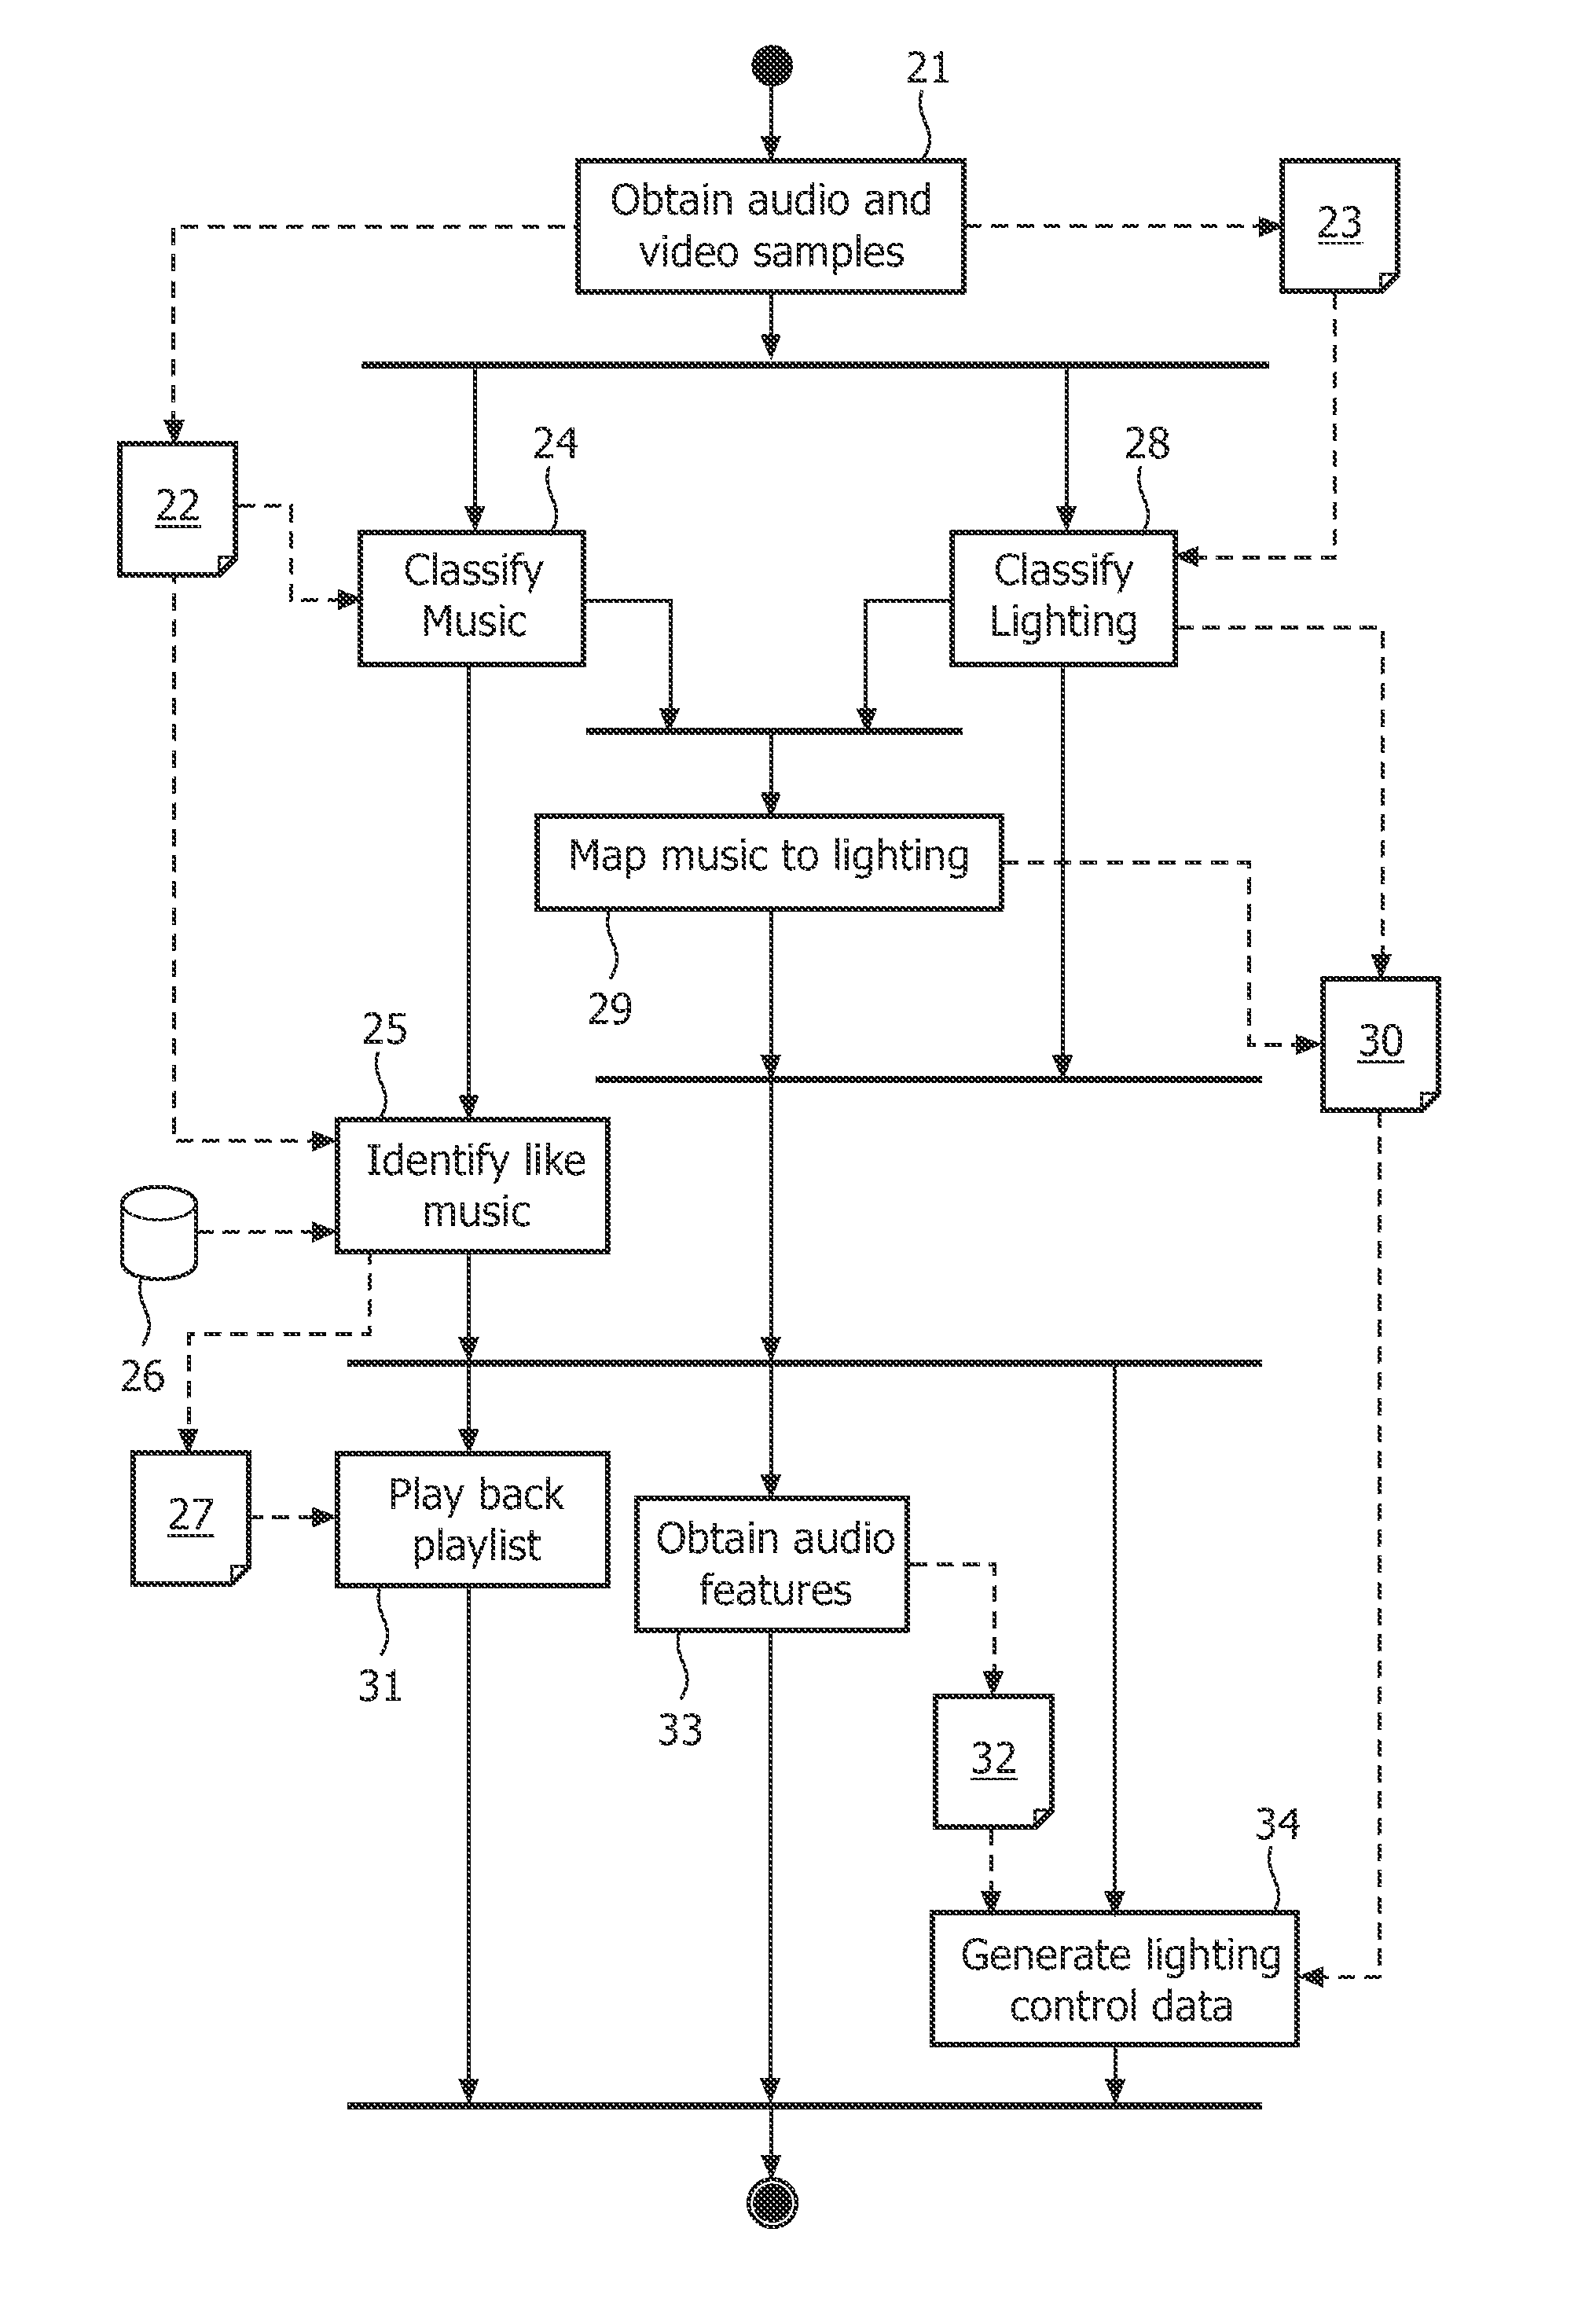 Method and system for generating data for controlling a system for rendering at least one signal